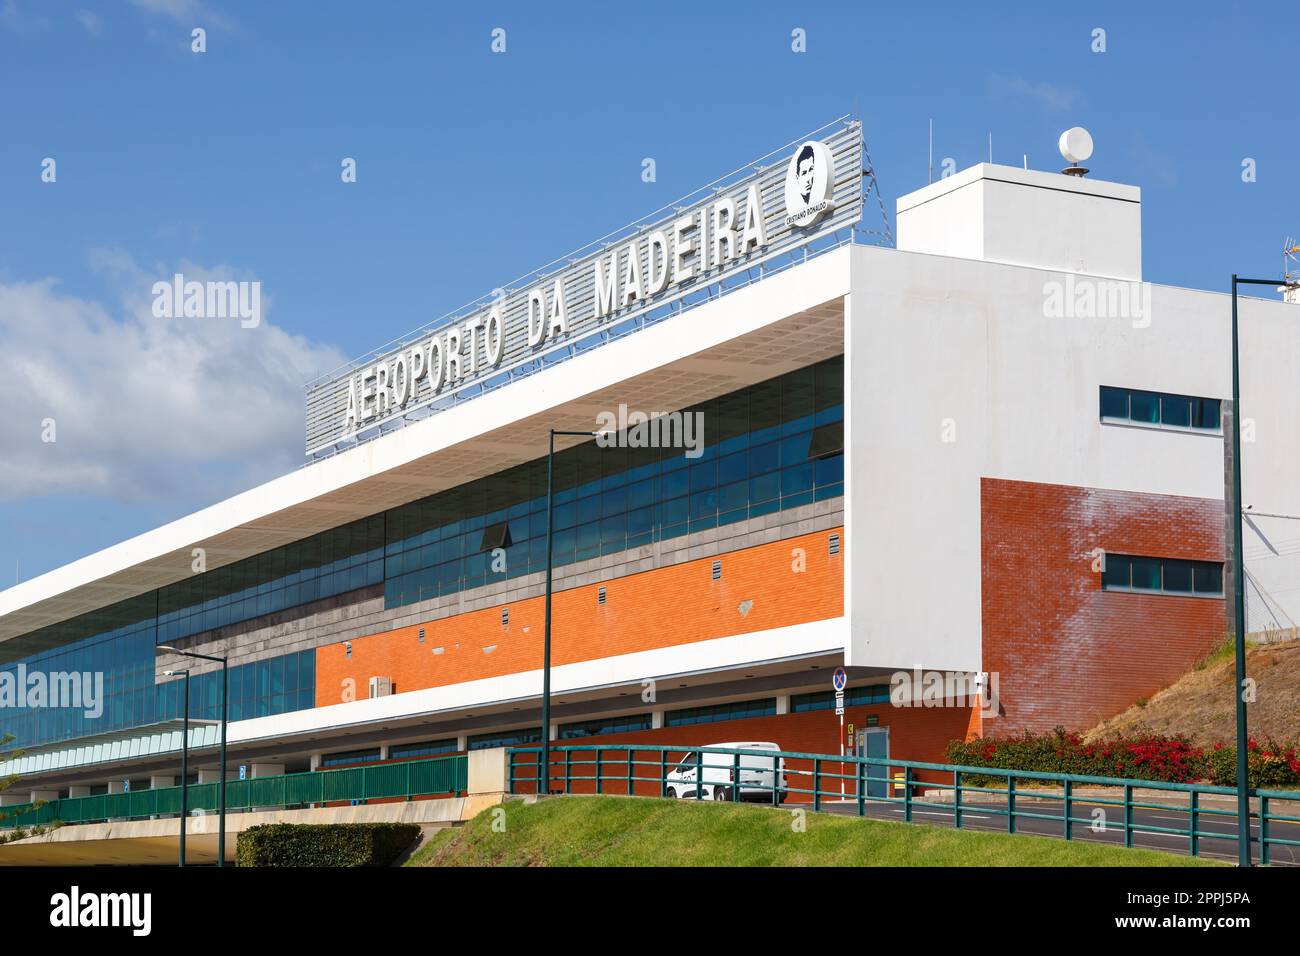 Terminal of Funchal Madeira Cristiano Ronaldo Airport in Portugal Stock Photo